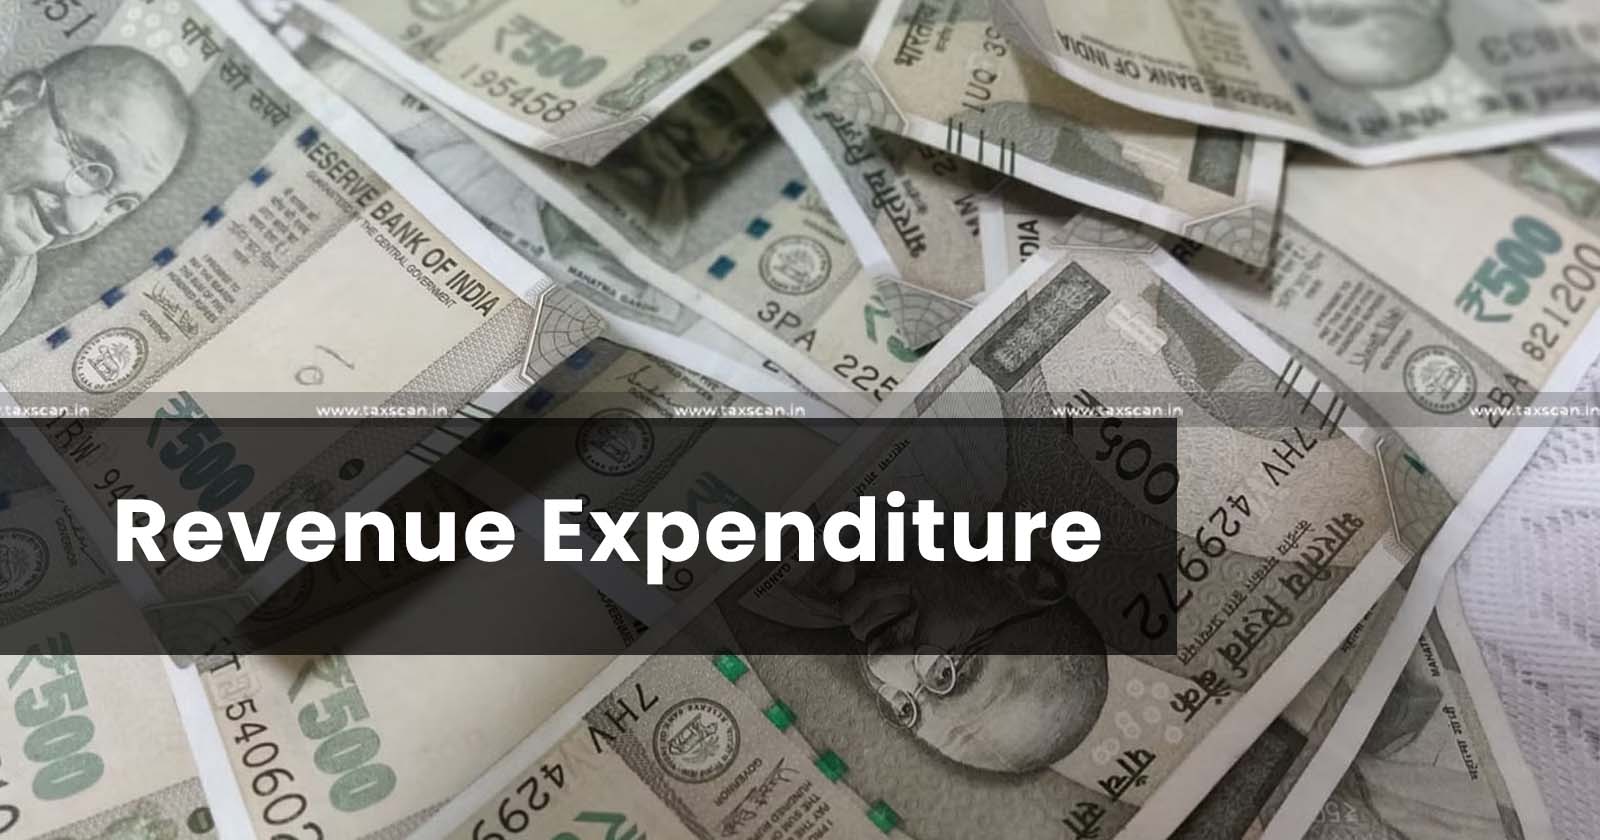 Expenditure pertaining - Consultancy fees - Revenue Expenditure - Income Tax Act - ITAT - Income - Appellate - taxscan